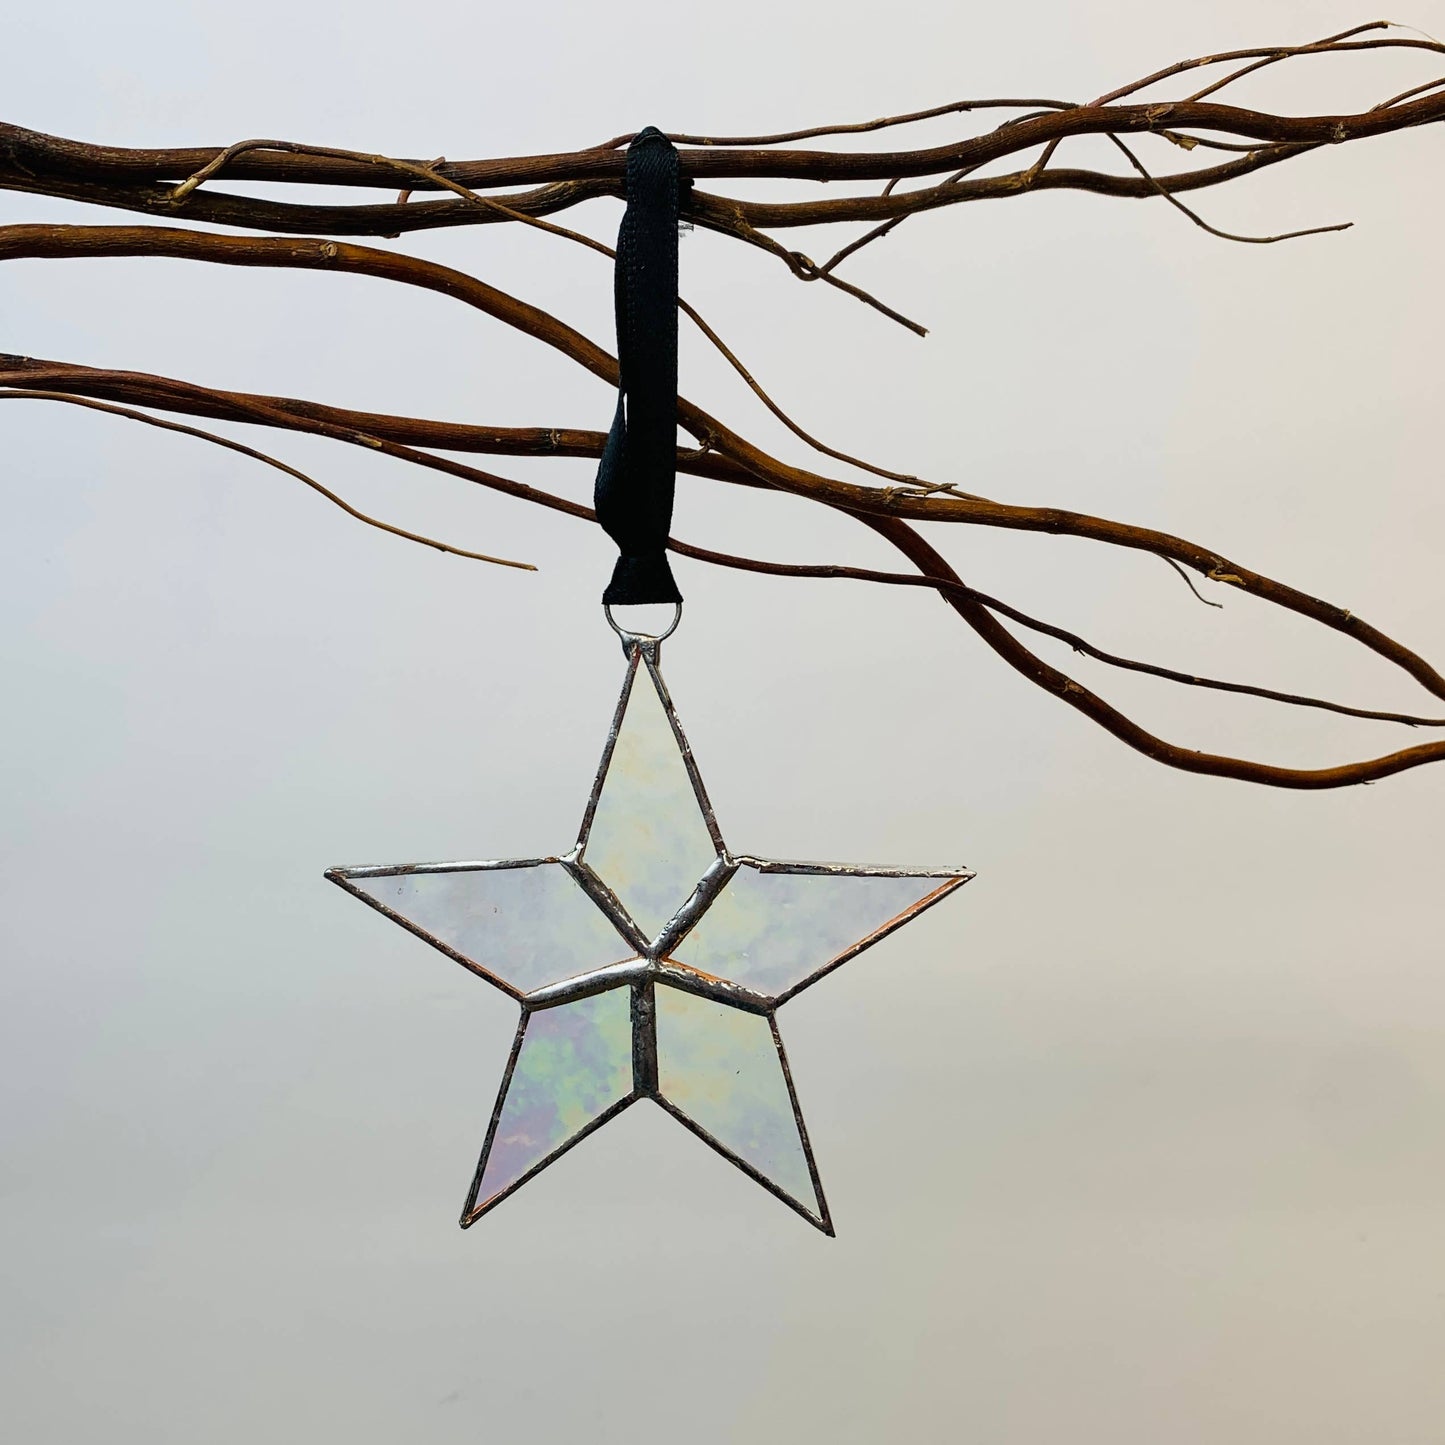 You + Shine: Congrats Handmade Stained Glass Star 7700